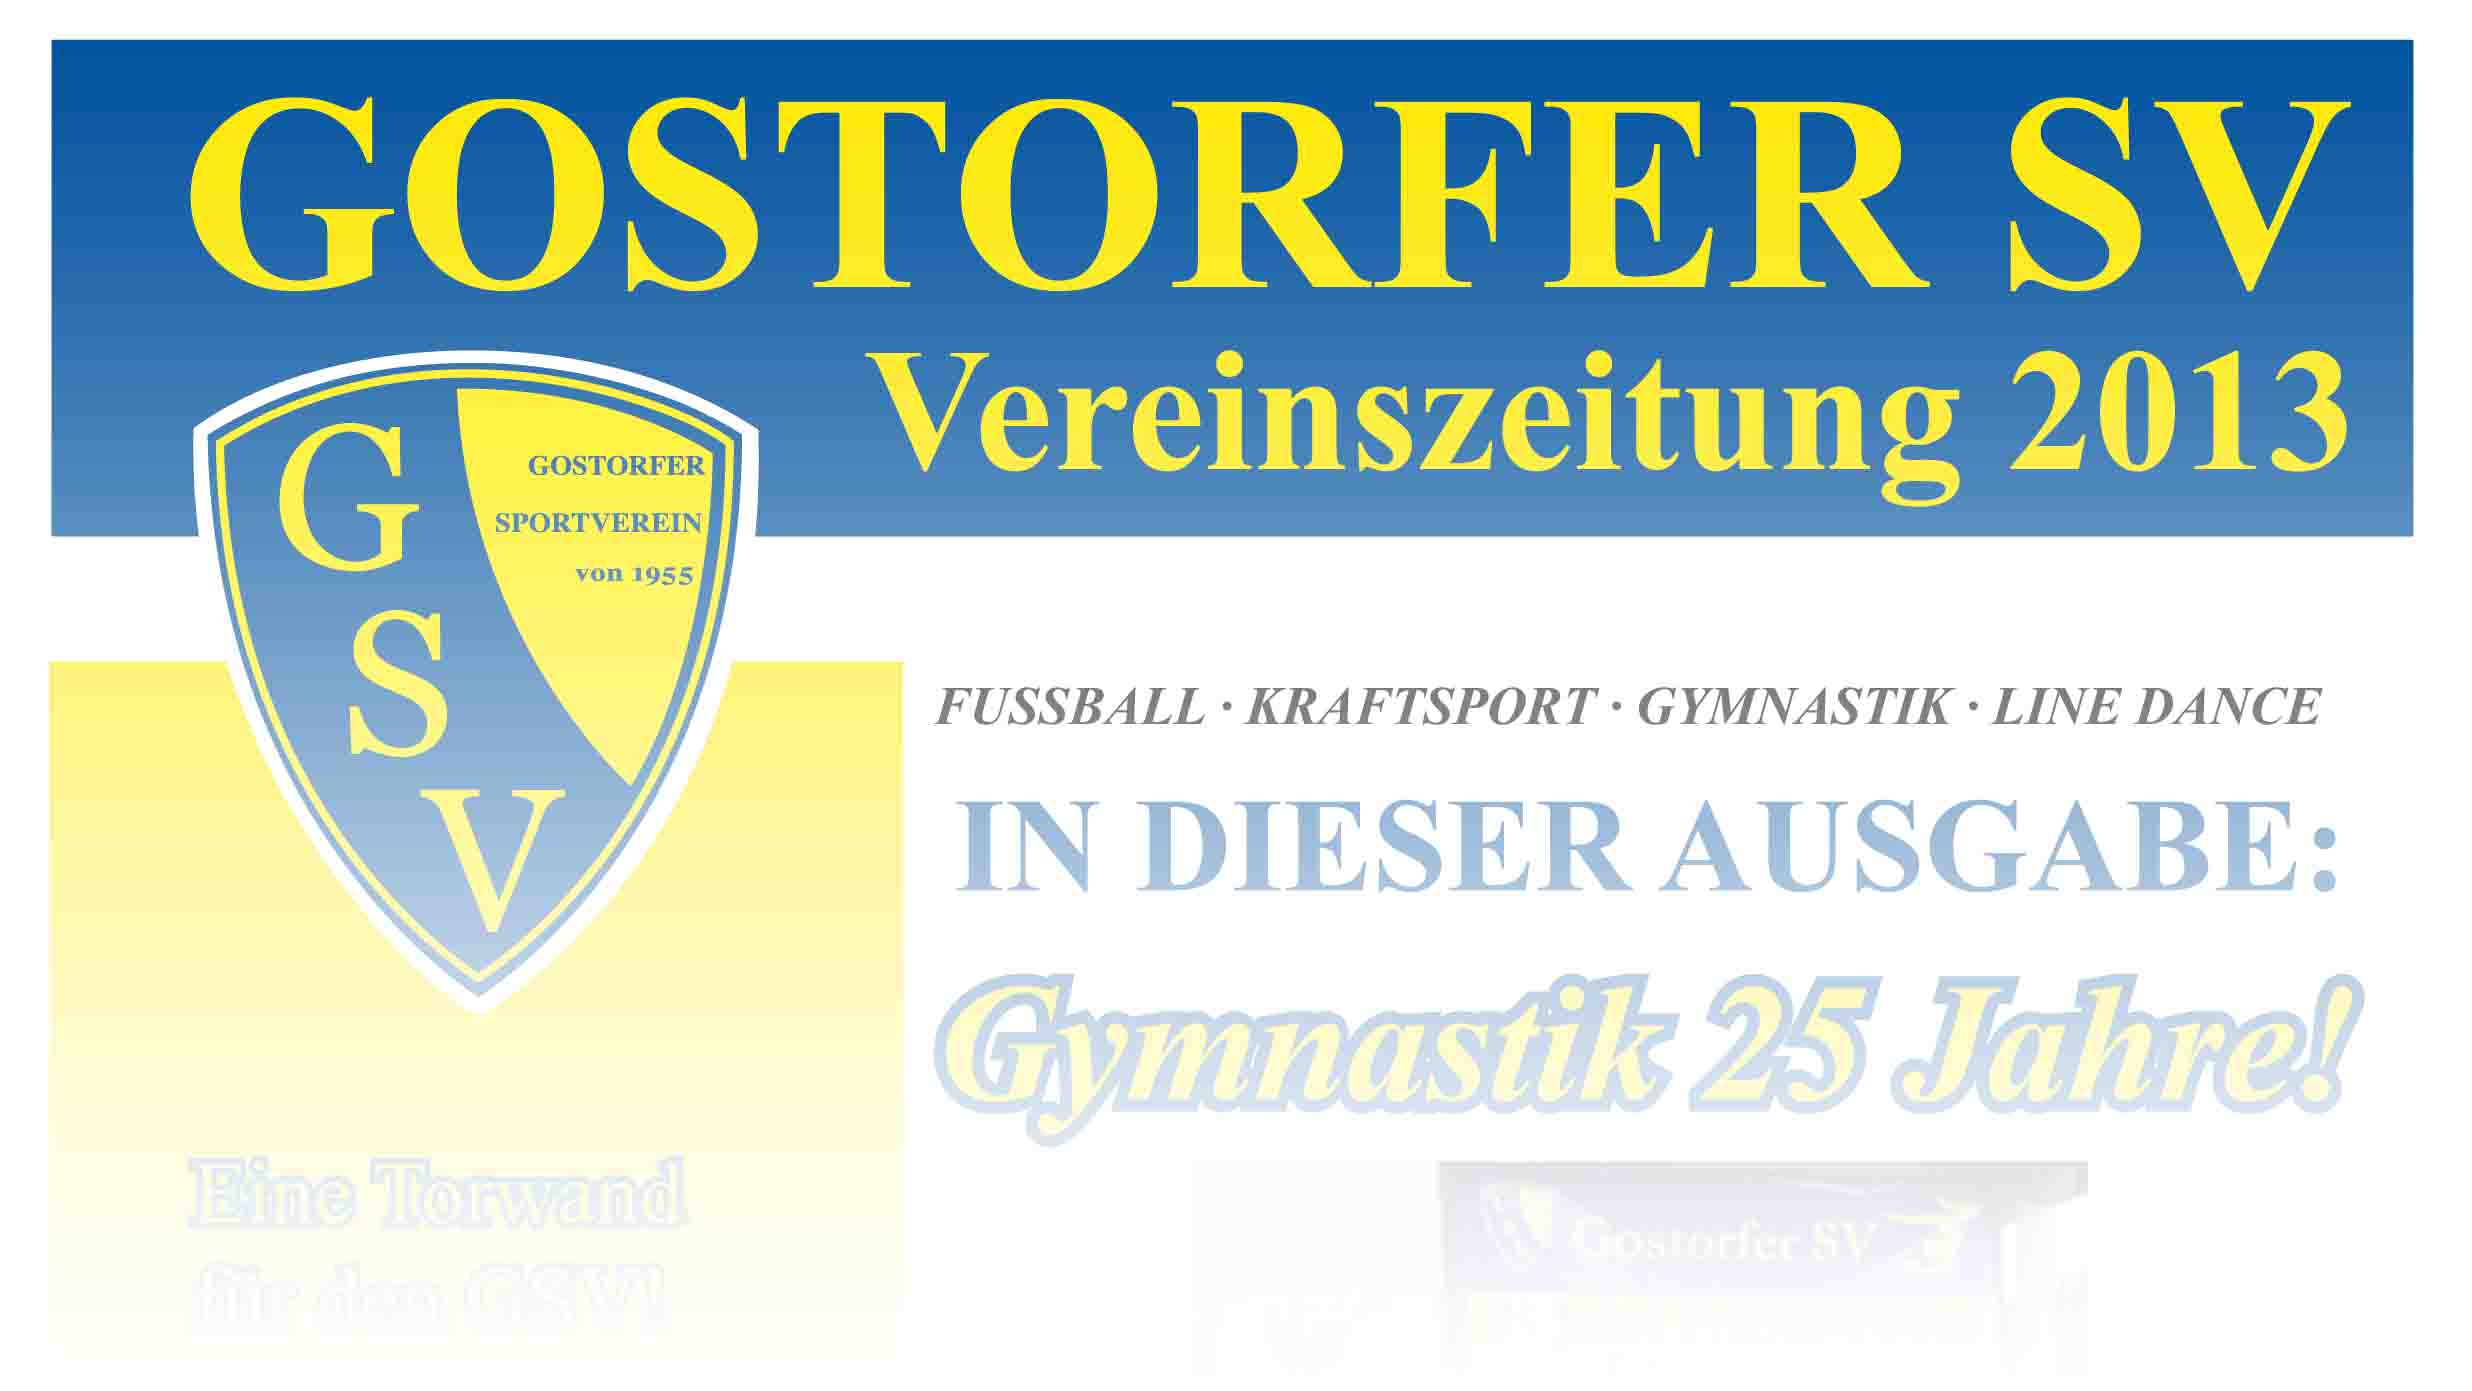 You are currently viewing Vereinszeitung 2013